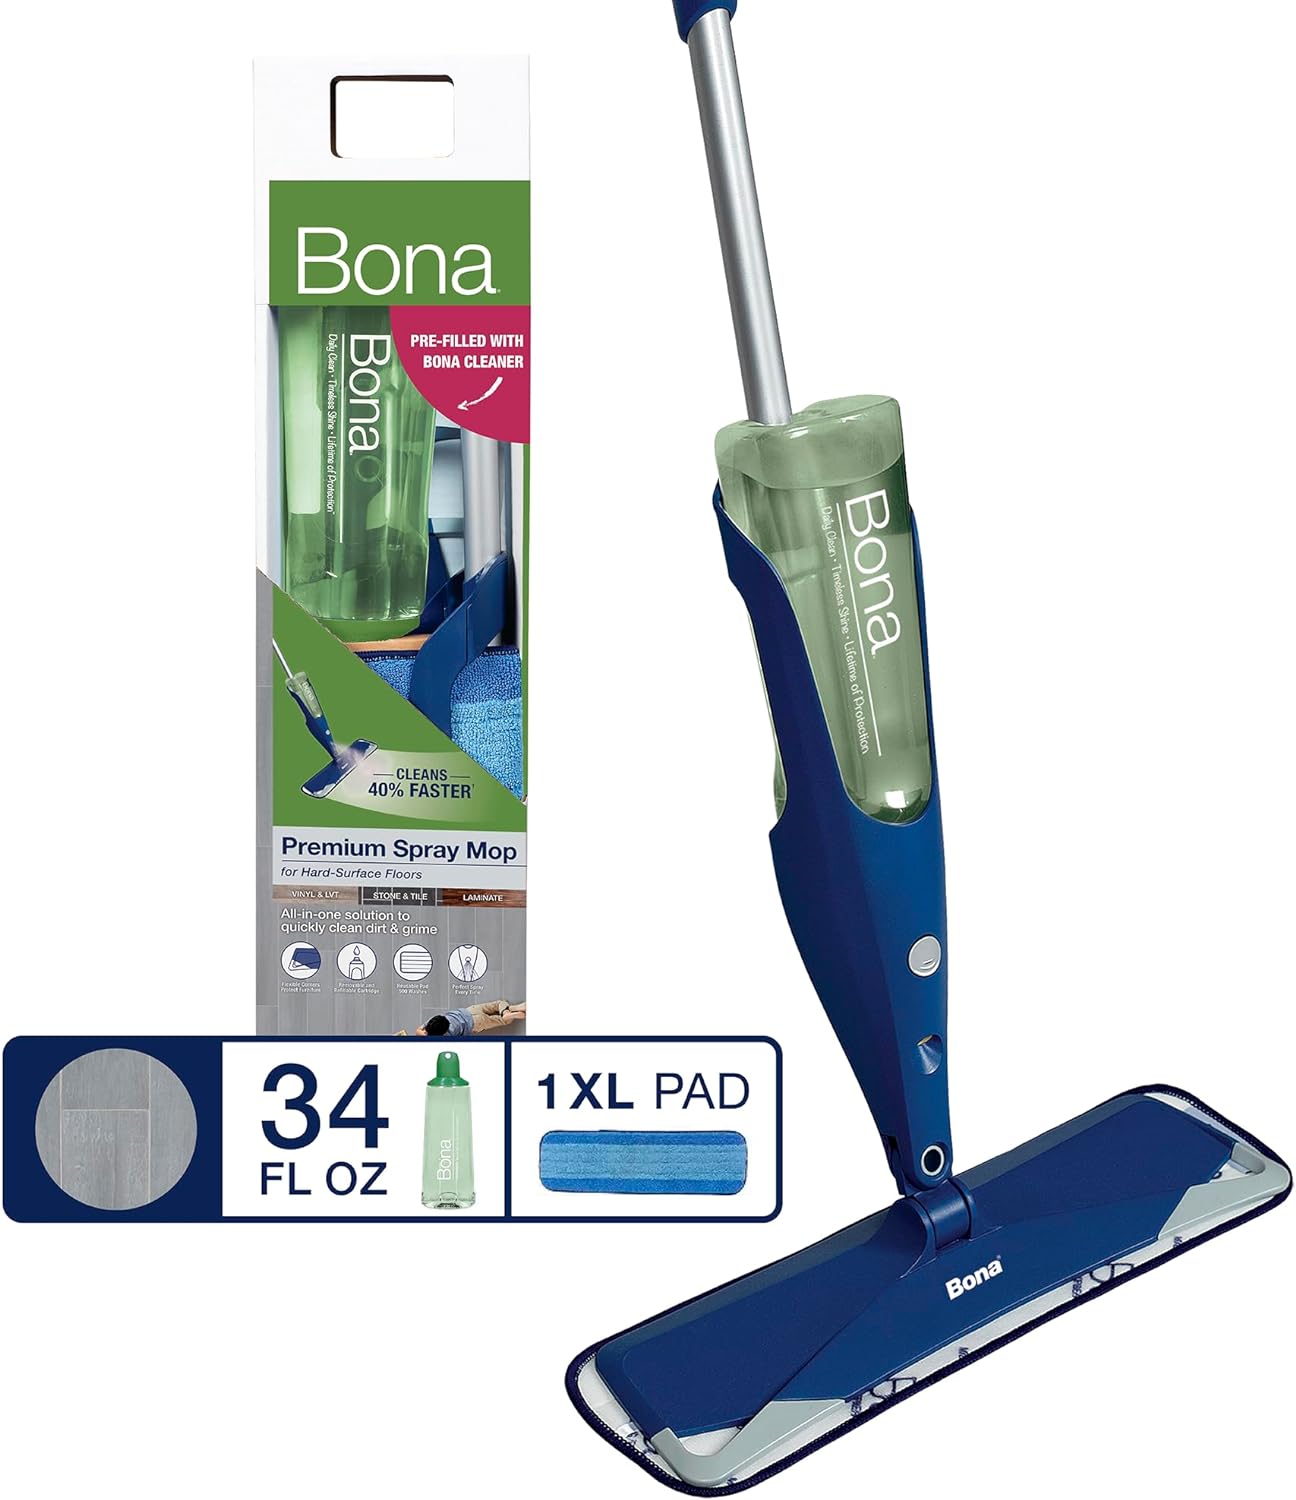 Bona Premium Multi-Surface Floor Spray Mop - Includes Multi-Surface Floor Cleaning Solution 34 fl oz and Machine Washable Microfiber Cleaning Pad - for Stone, Tile, Laminate, and Vinyl Floors